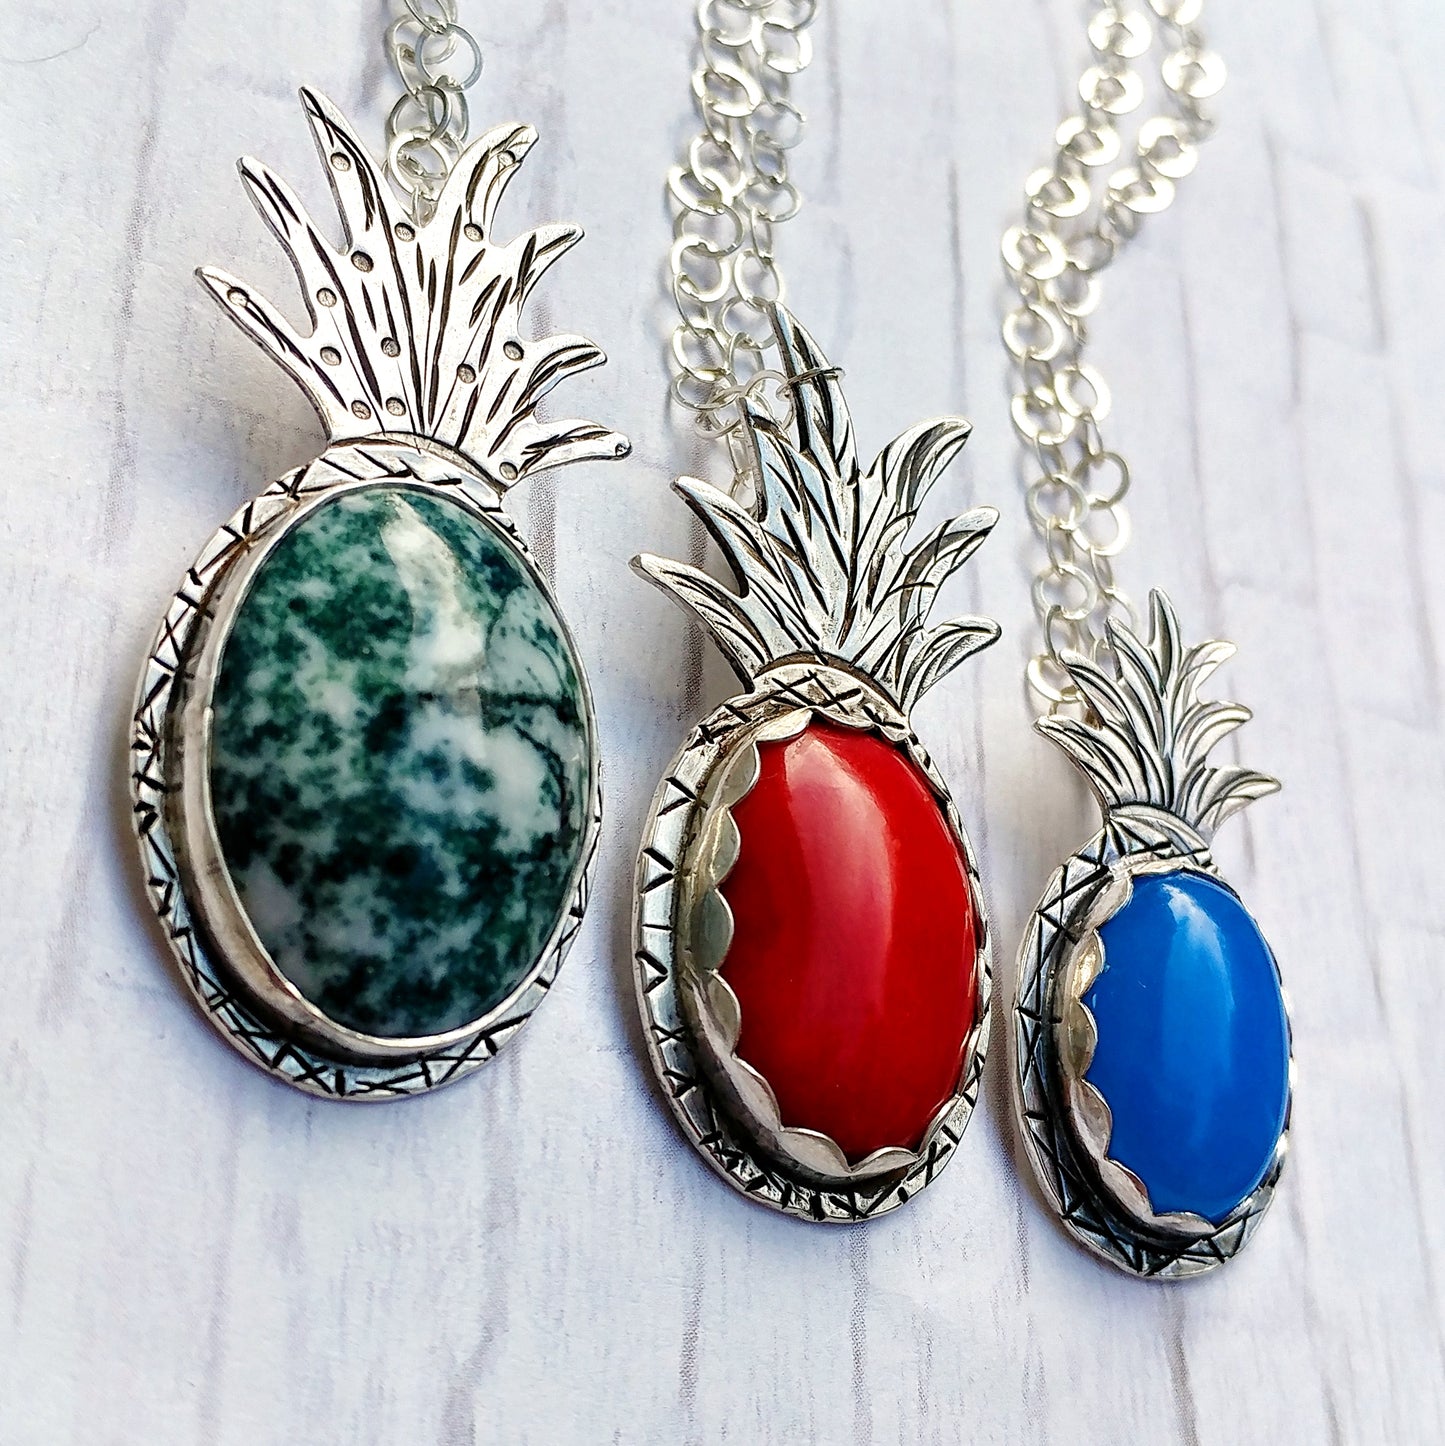 A trio of pineapple necklaces with various gemstones